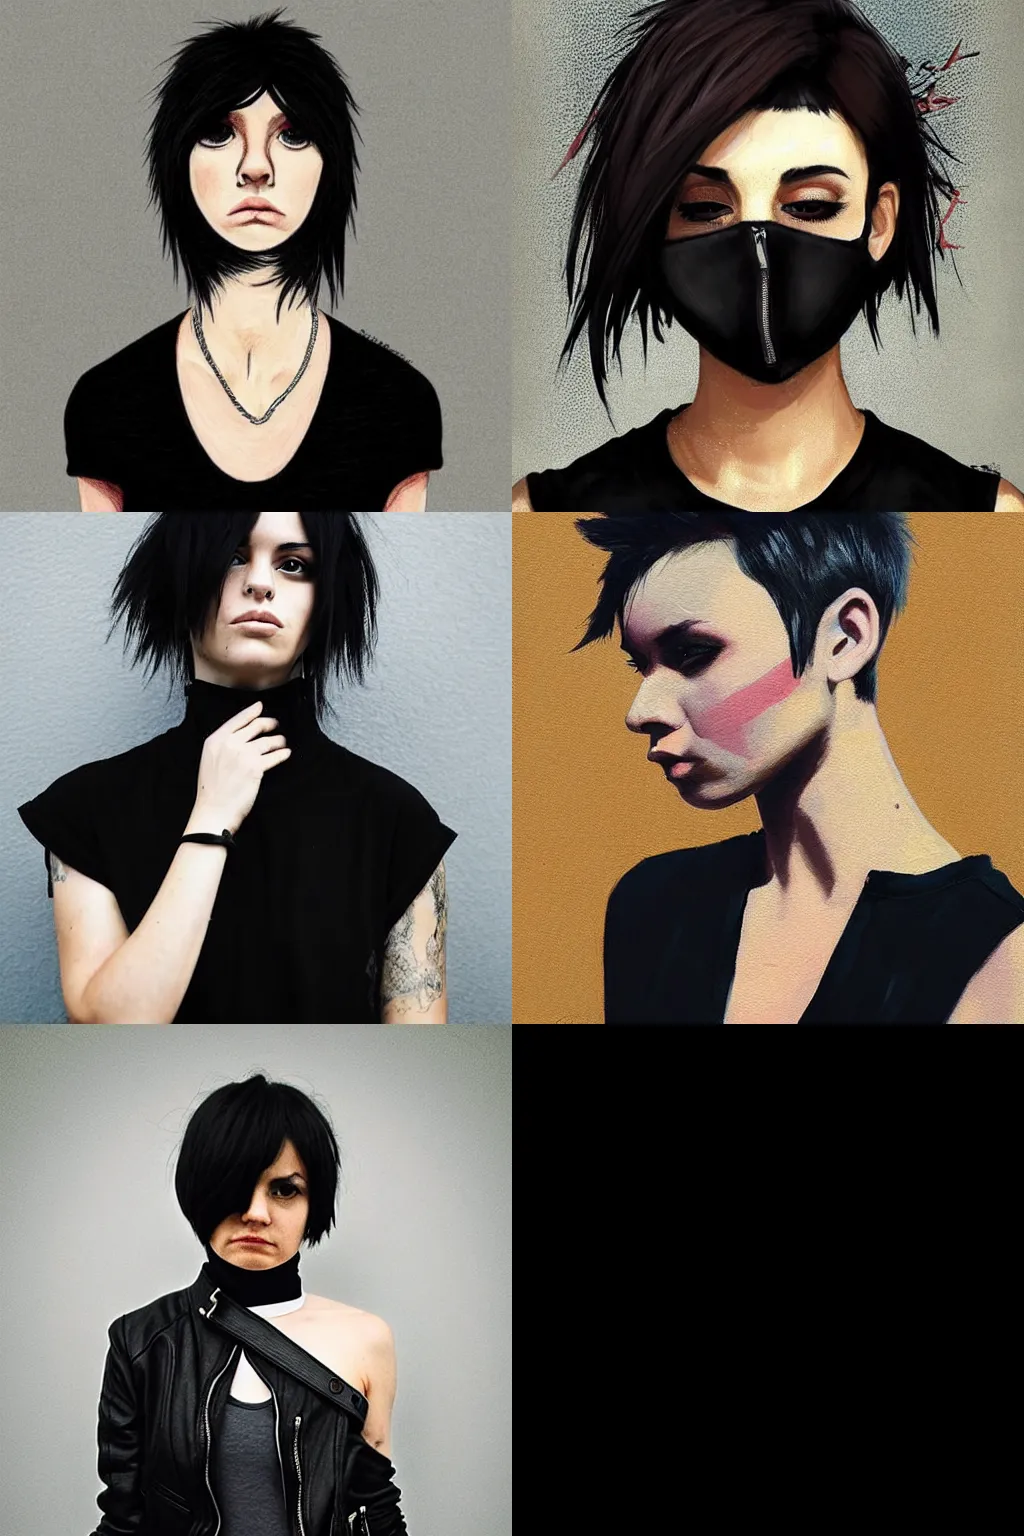 Prompt: an emo portrait by alena aenami. her hair is dark brown and cut into a short, messy pixie cut. she has a slightly rounded face, with a pointed chin, large entirely - black eyes, and a small nose. she is wearing a black tank top, a black leather jacket, a black knee - length skirt, and a black choker..